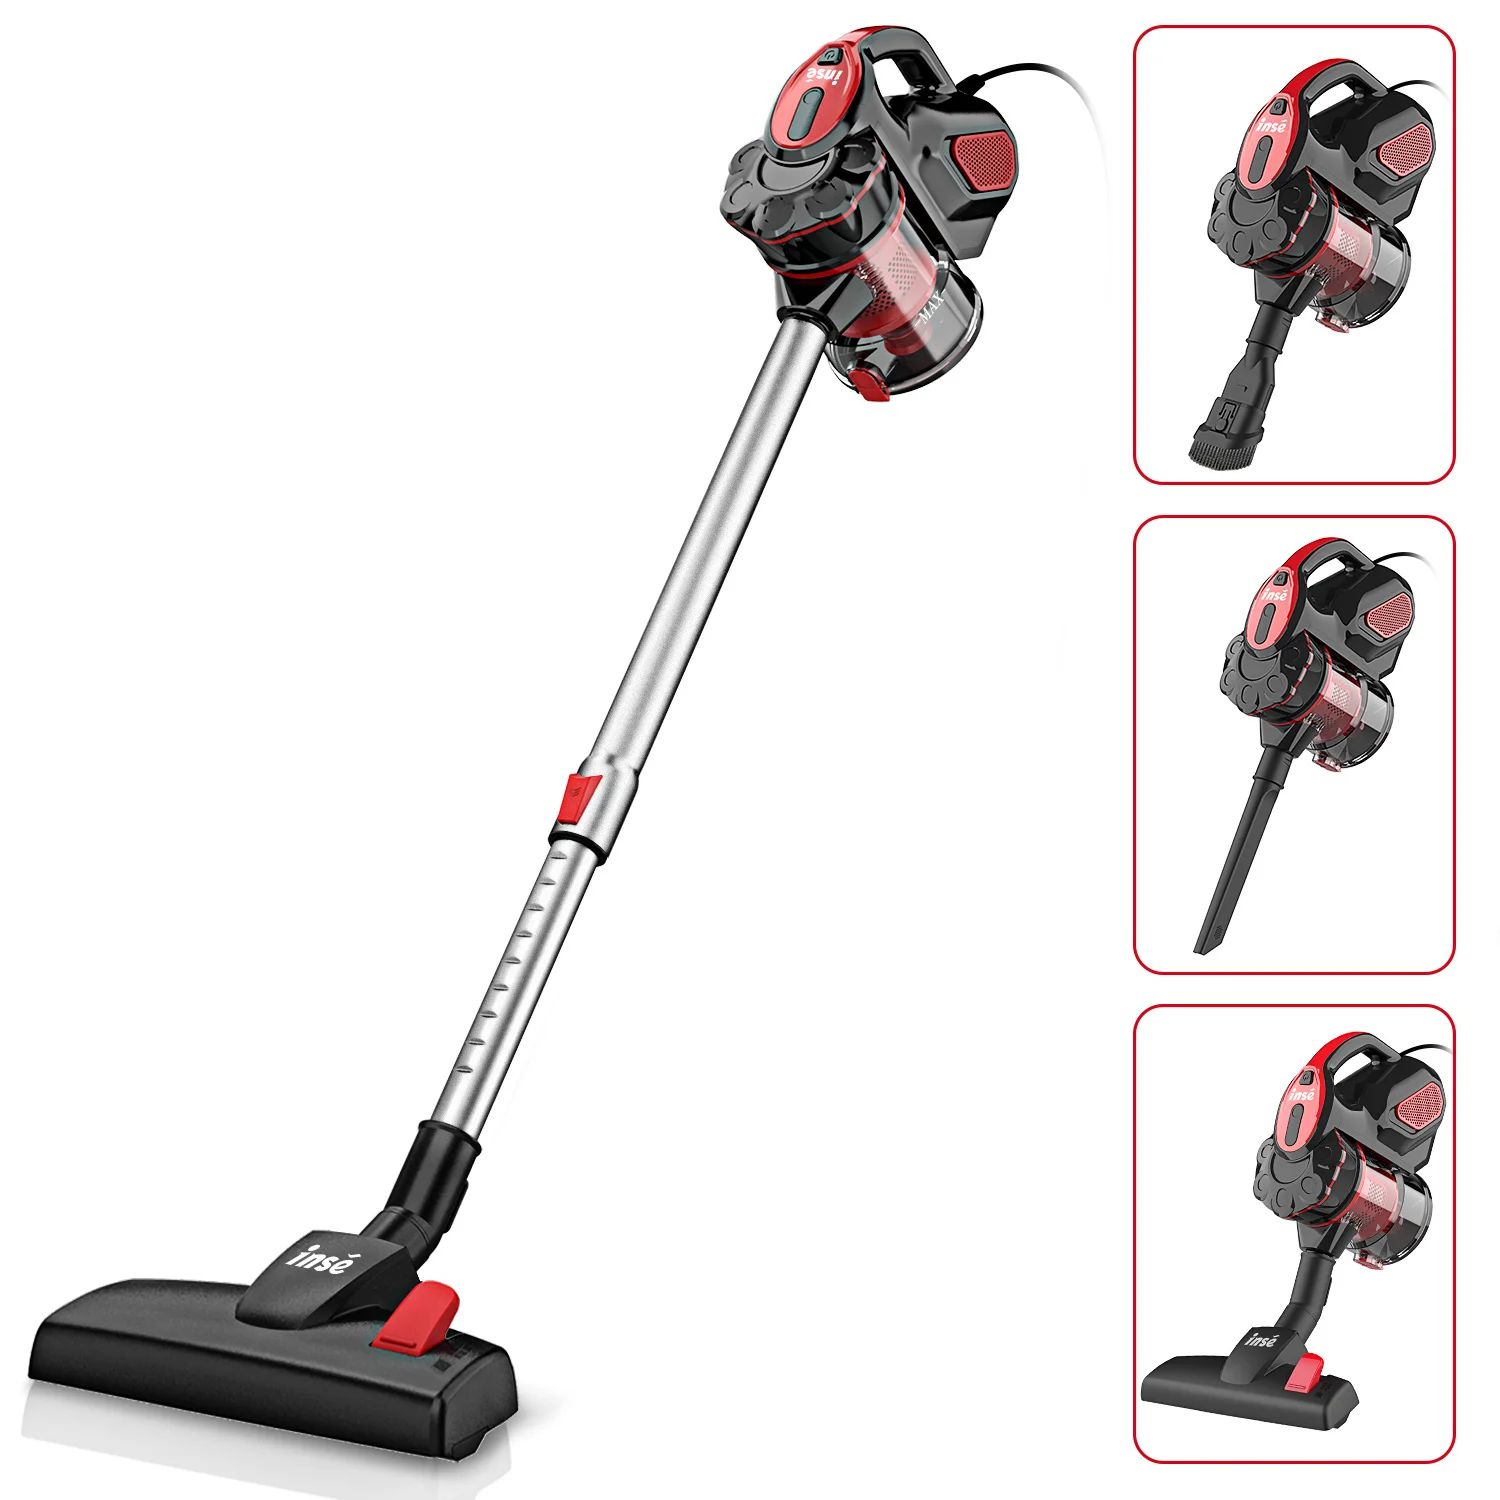 INSE Corded Vacuum Cleaner 18000Pa 600W Strong Suction Power, 22ft Corded Handheld Vacuum Cleaner for Home